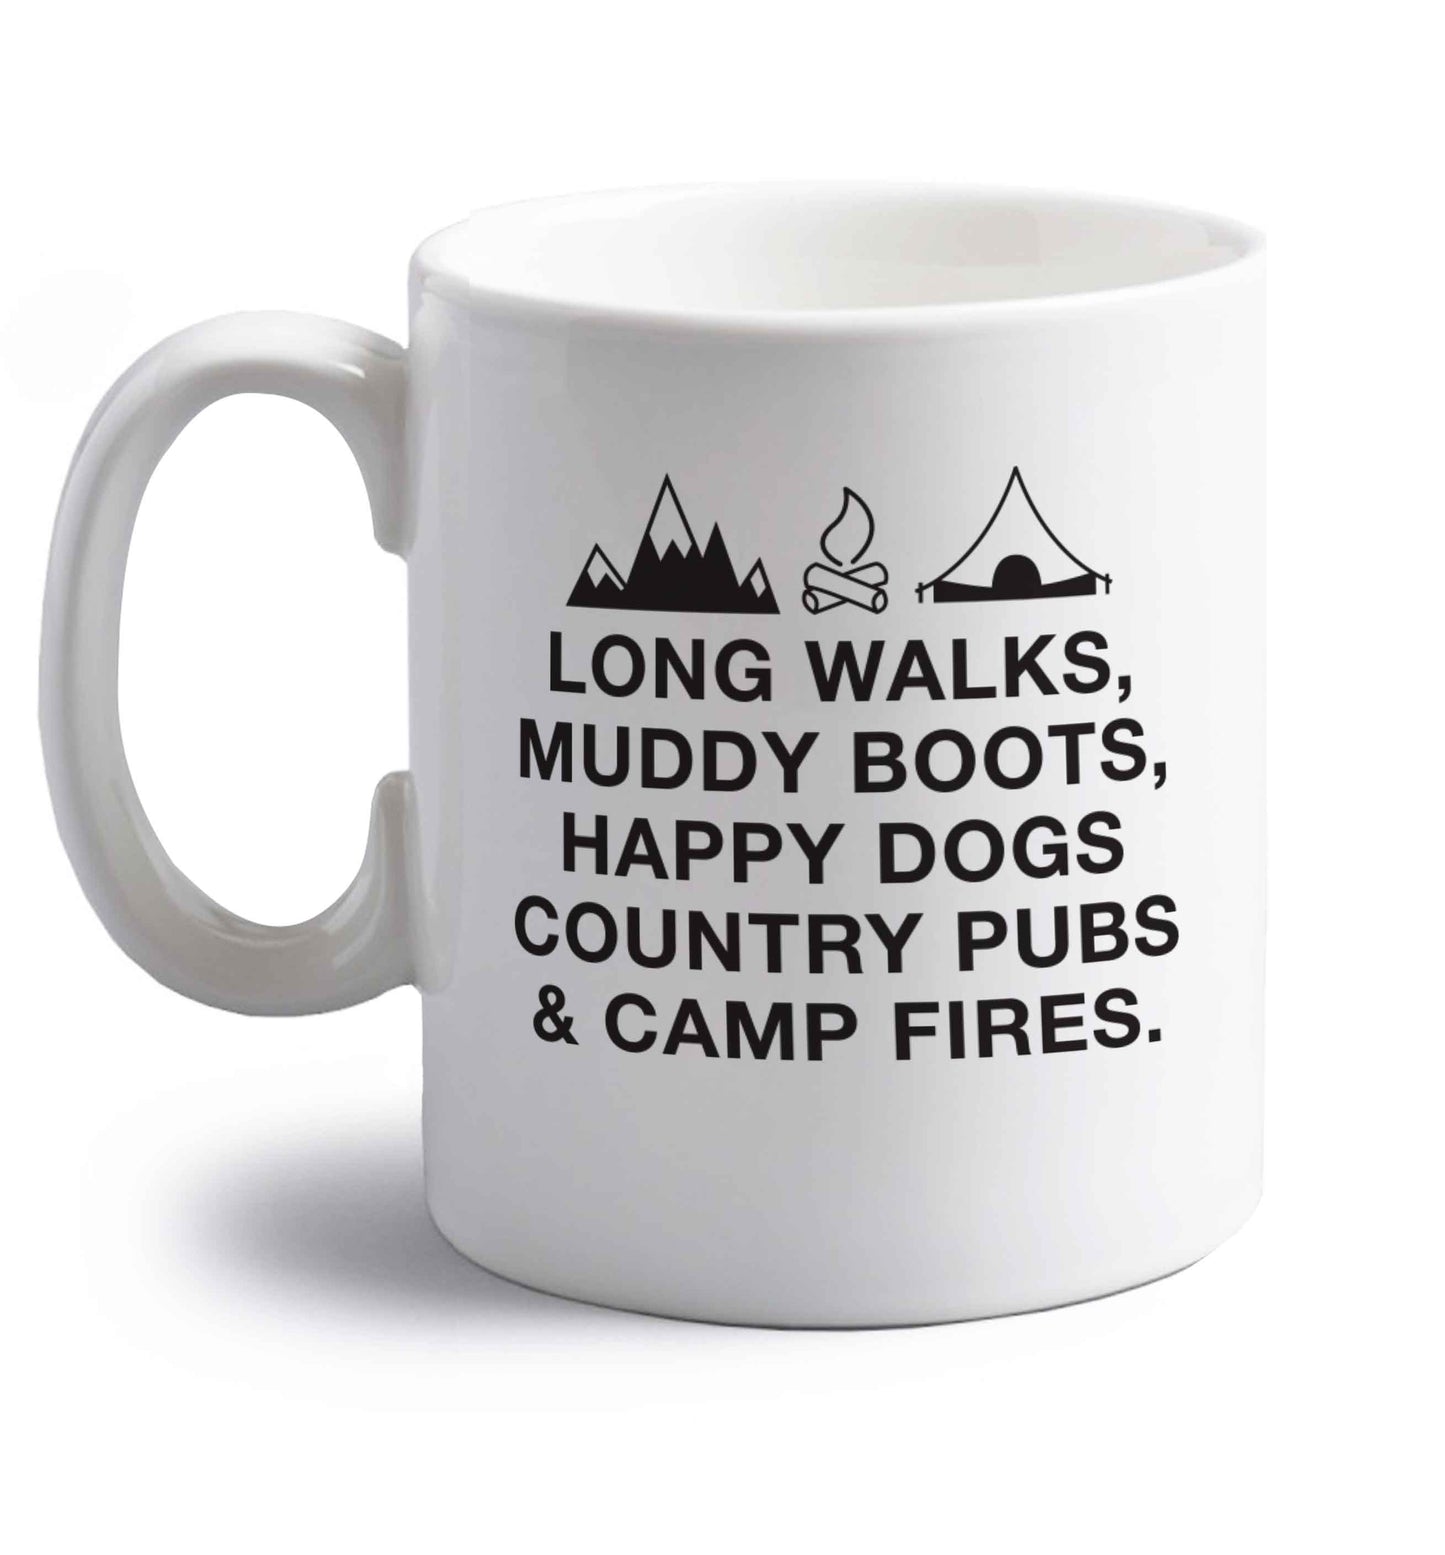 Long walks muddy boots happy dogs country pubs and camp fires right handed white ceramic mug 